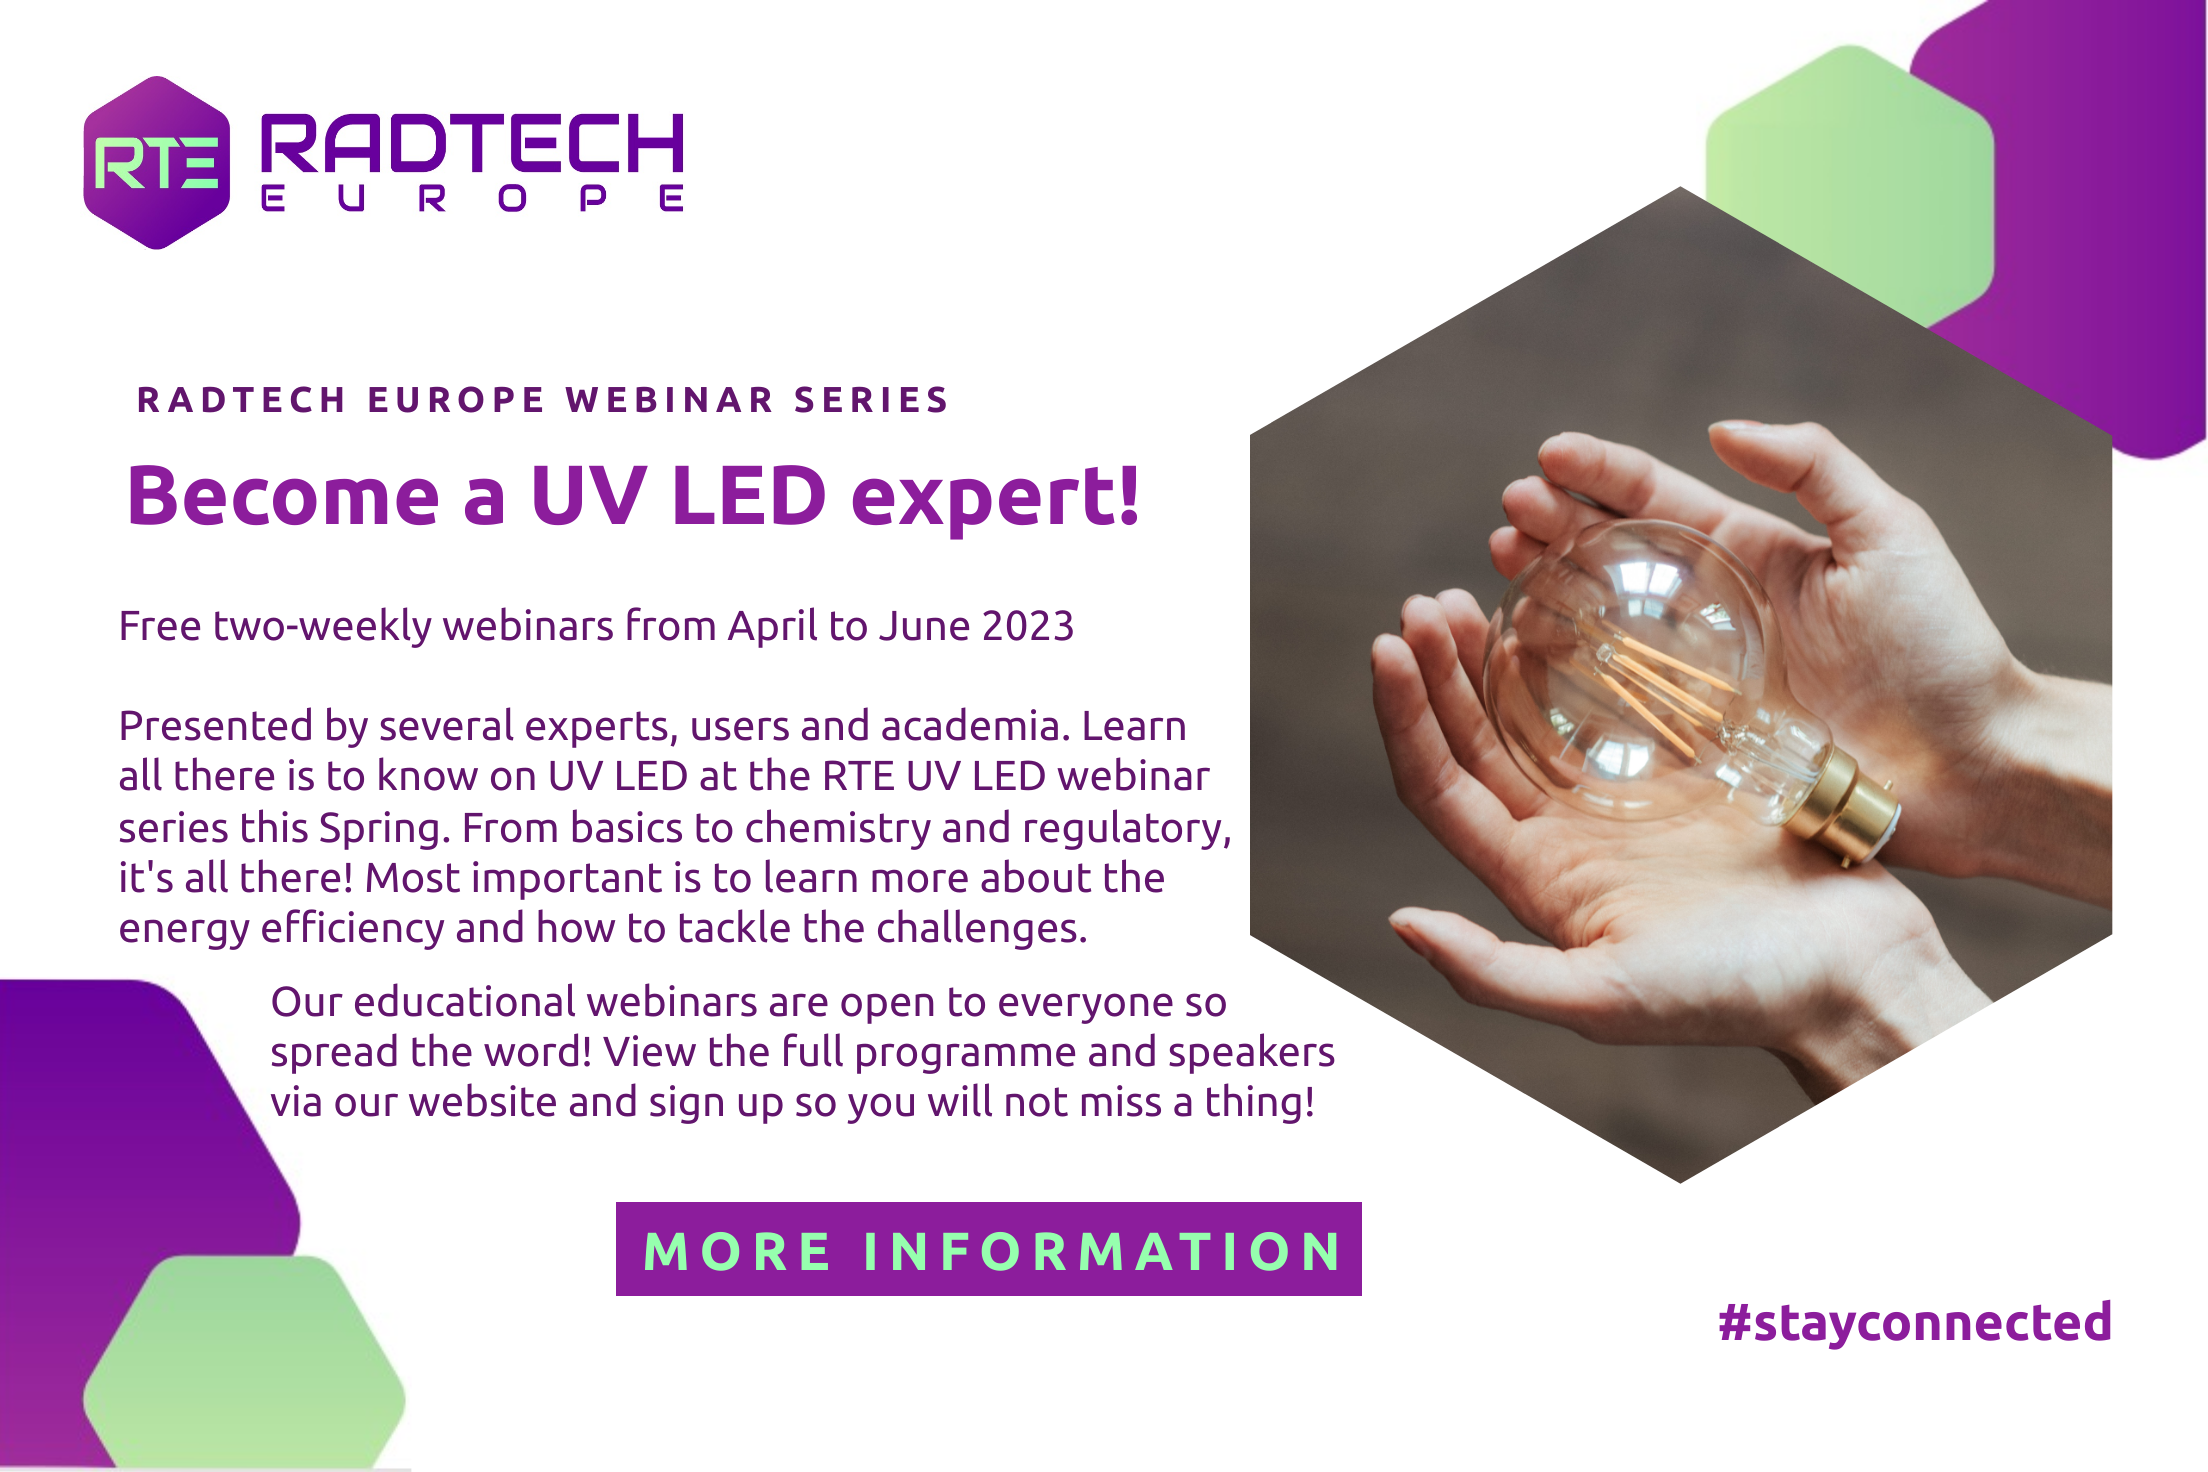 RadTech Europe informing the market on the basics and latest in UV LED